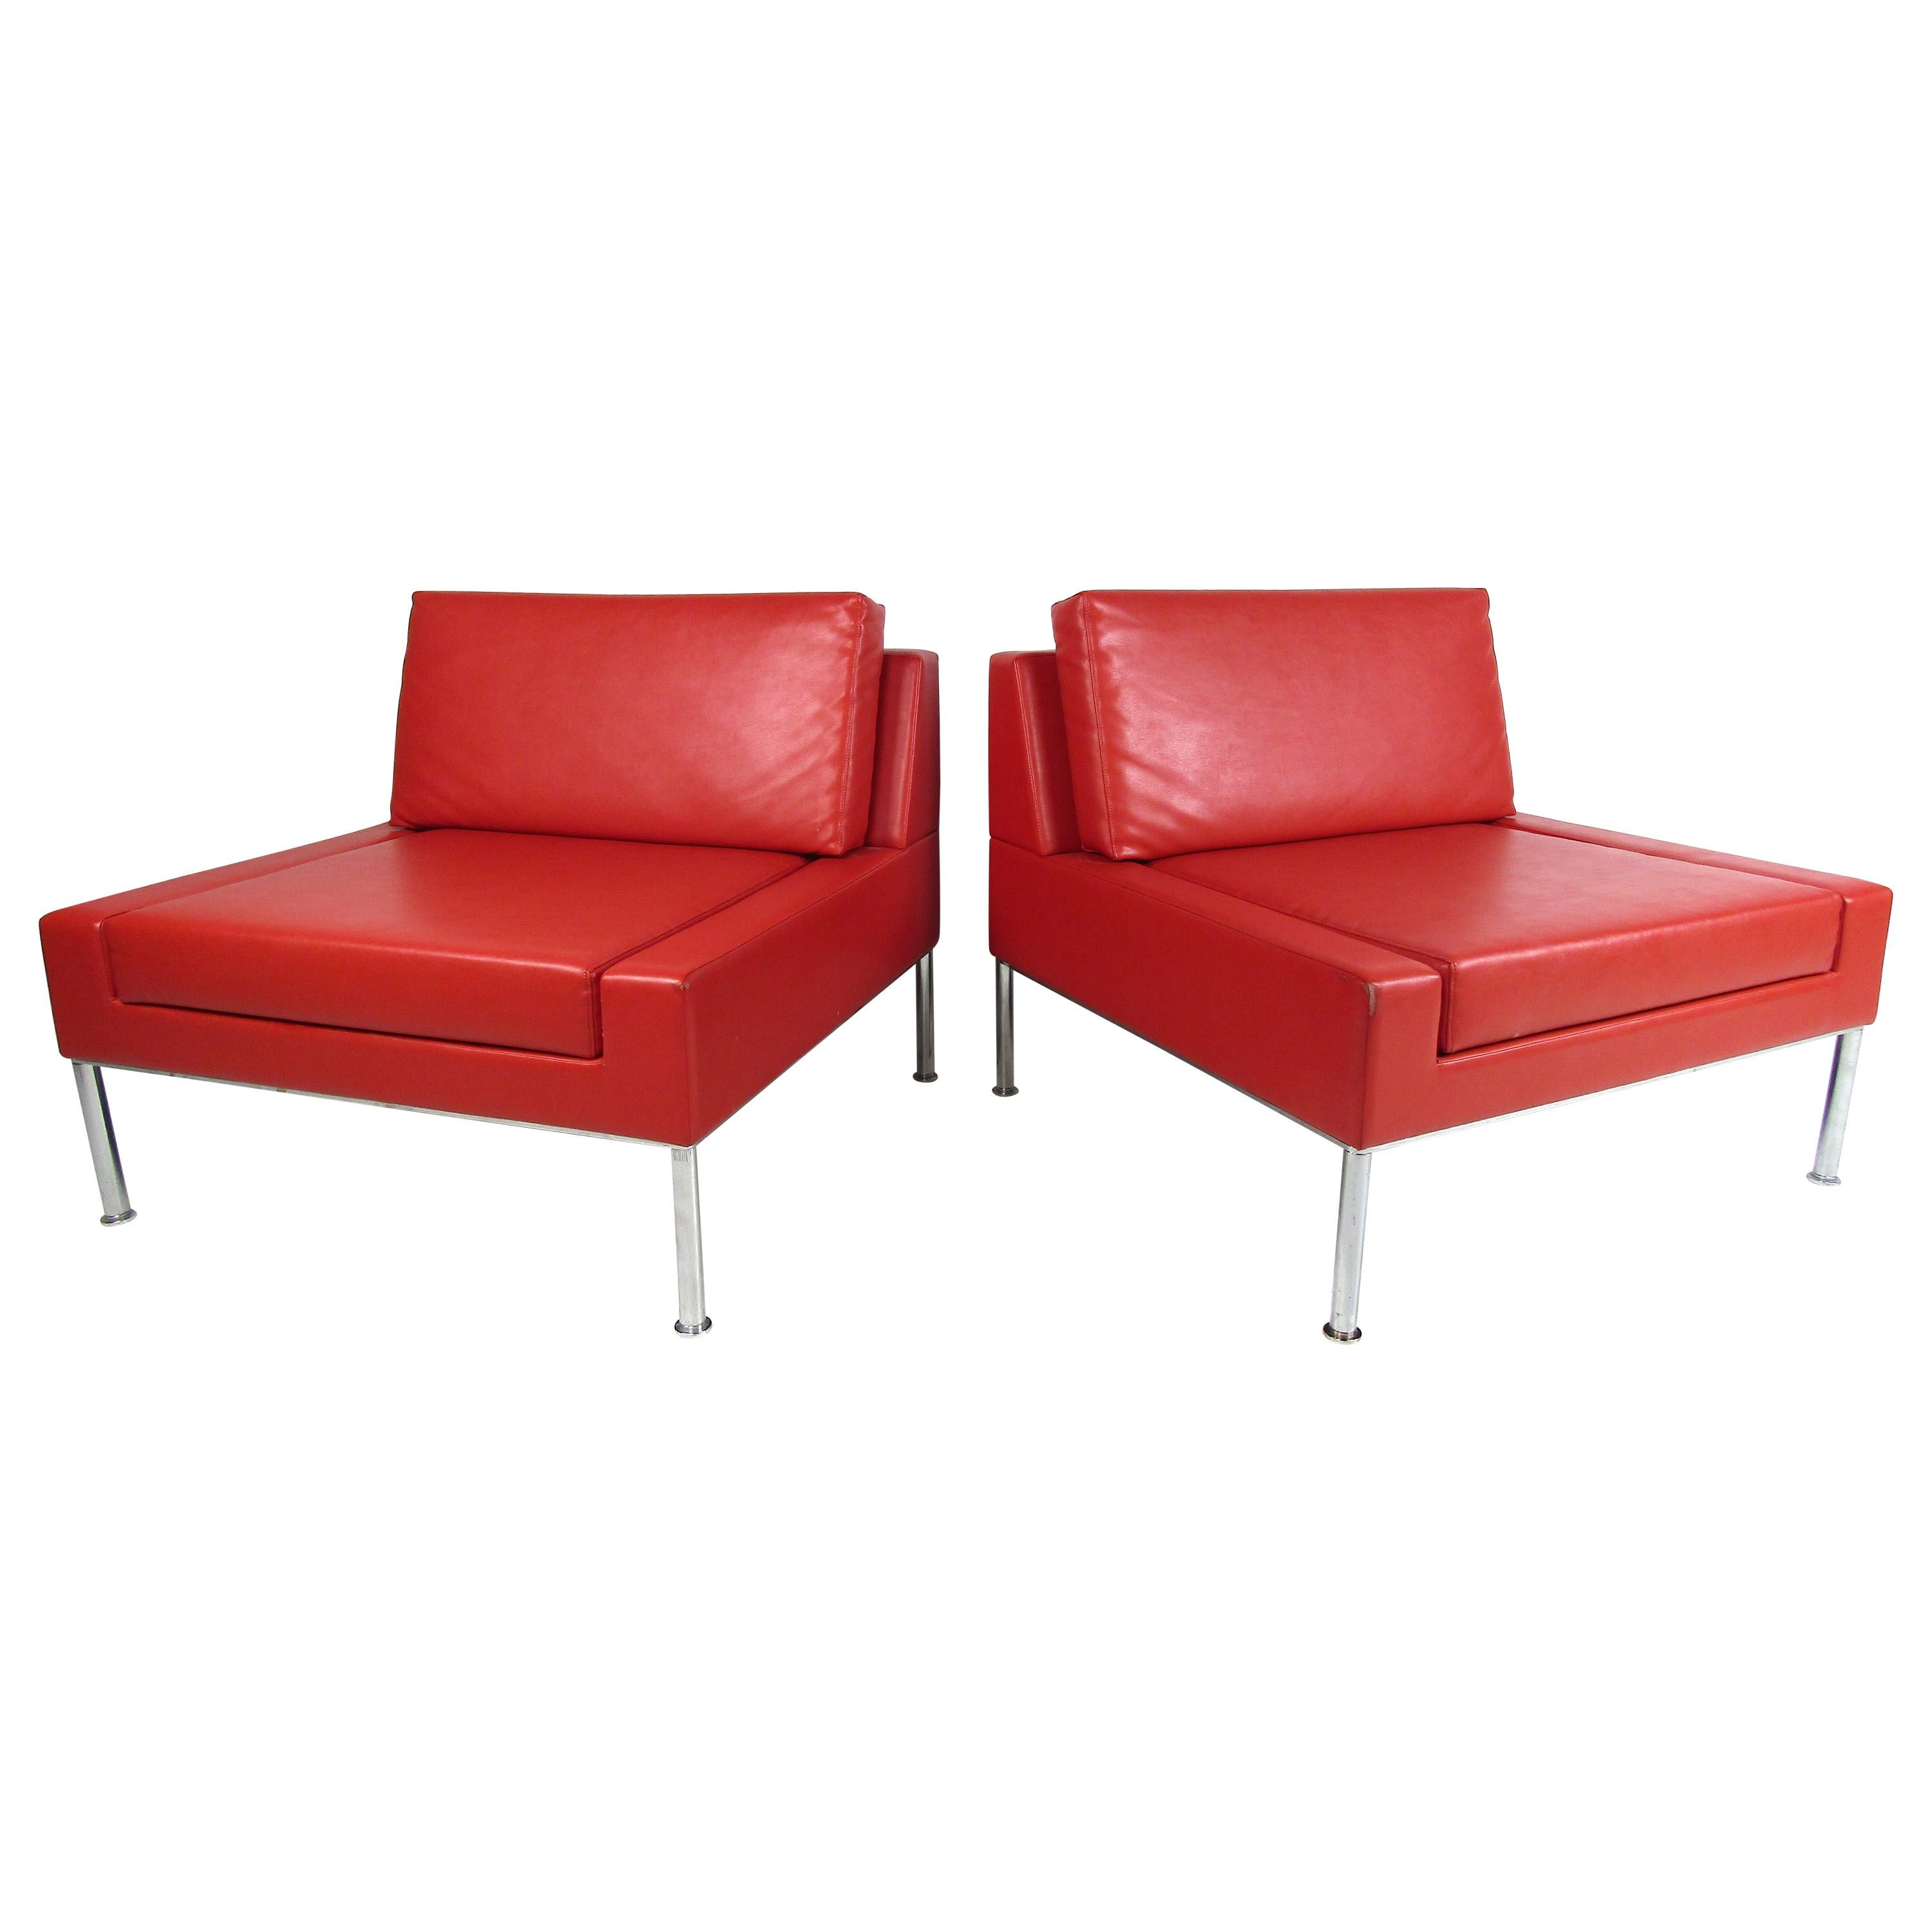 Pair of Modern Style Vinyl and Chrome Slipper Chairs